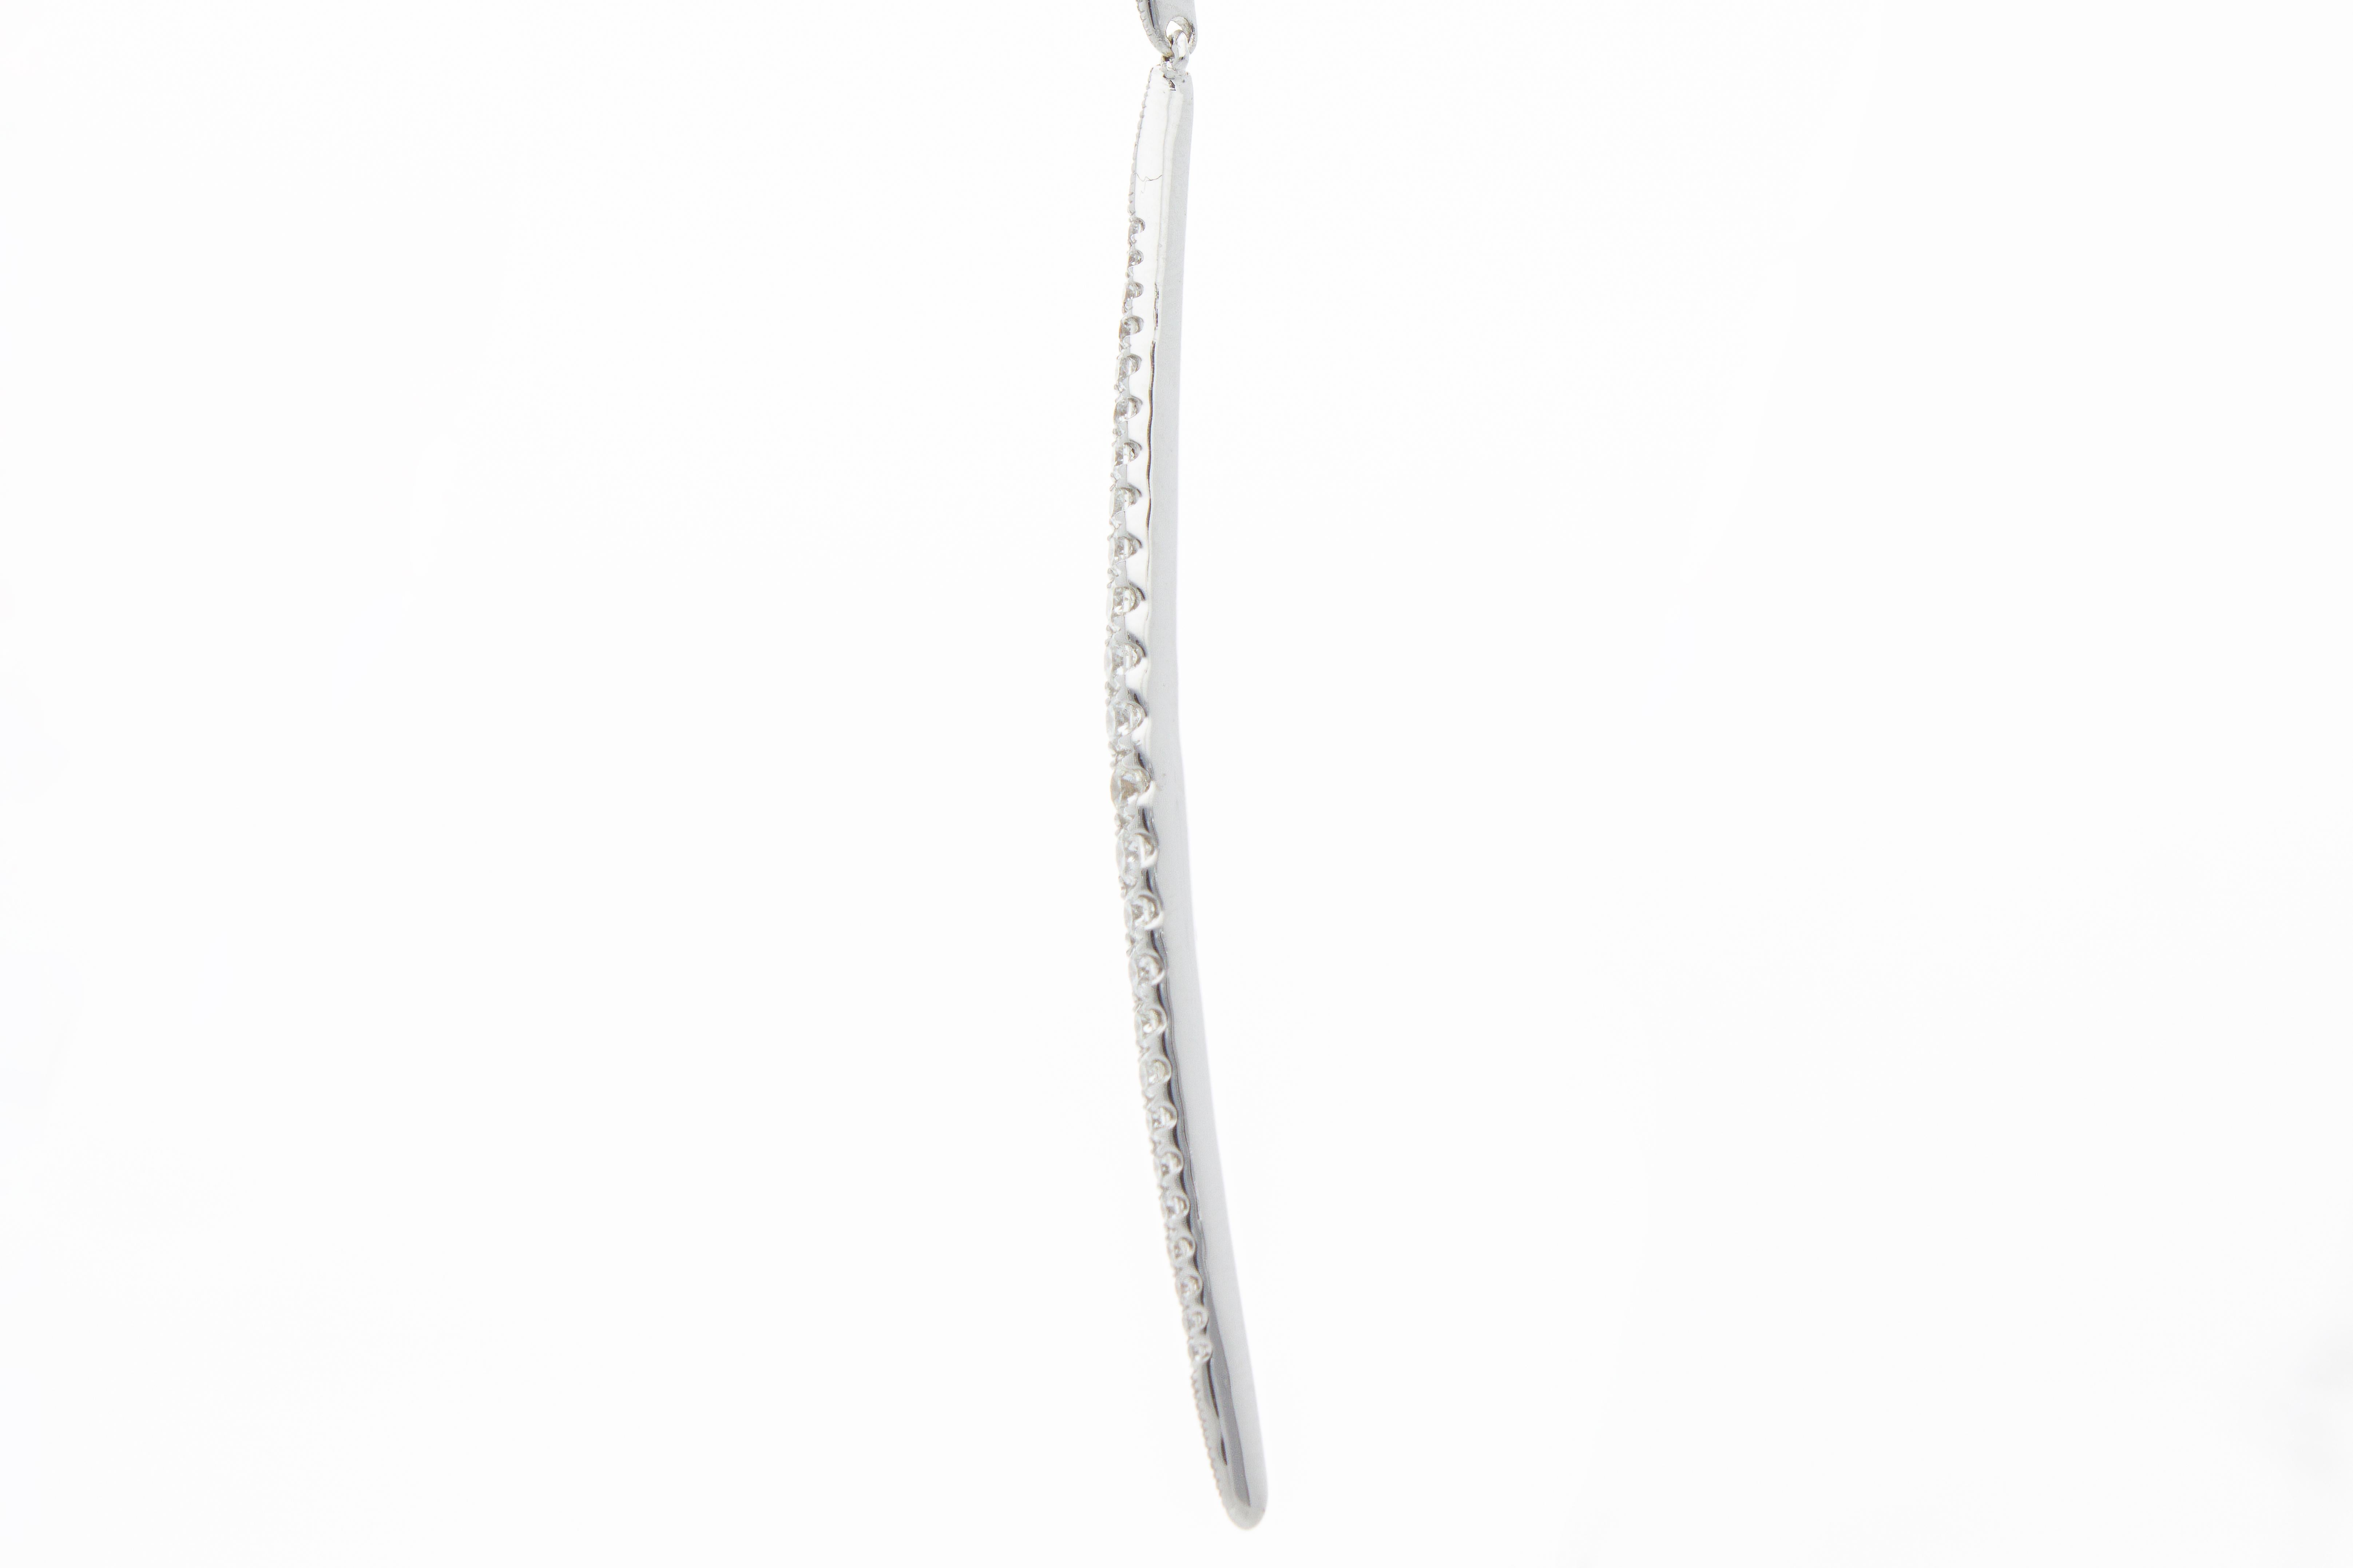 Earrings with 0.74 Ct of Gradated Diamonds, on Hanging Bars, 18 Kt White Gold For Sale 5